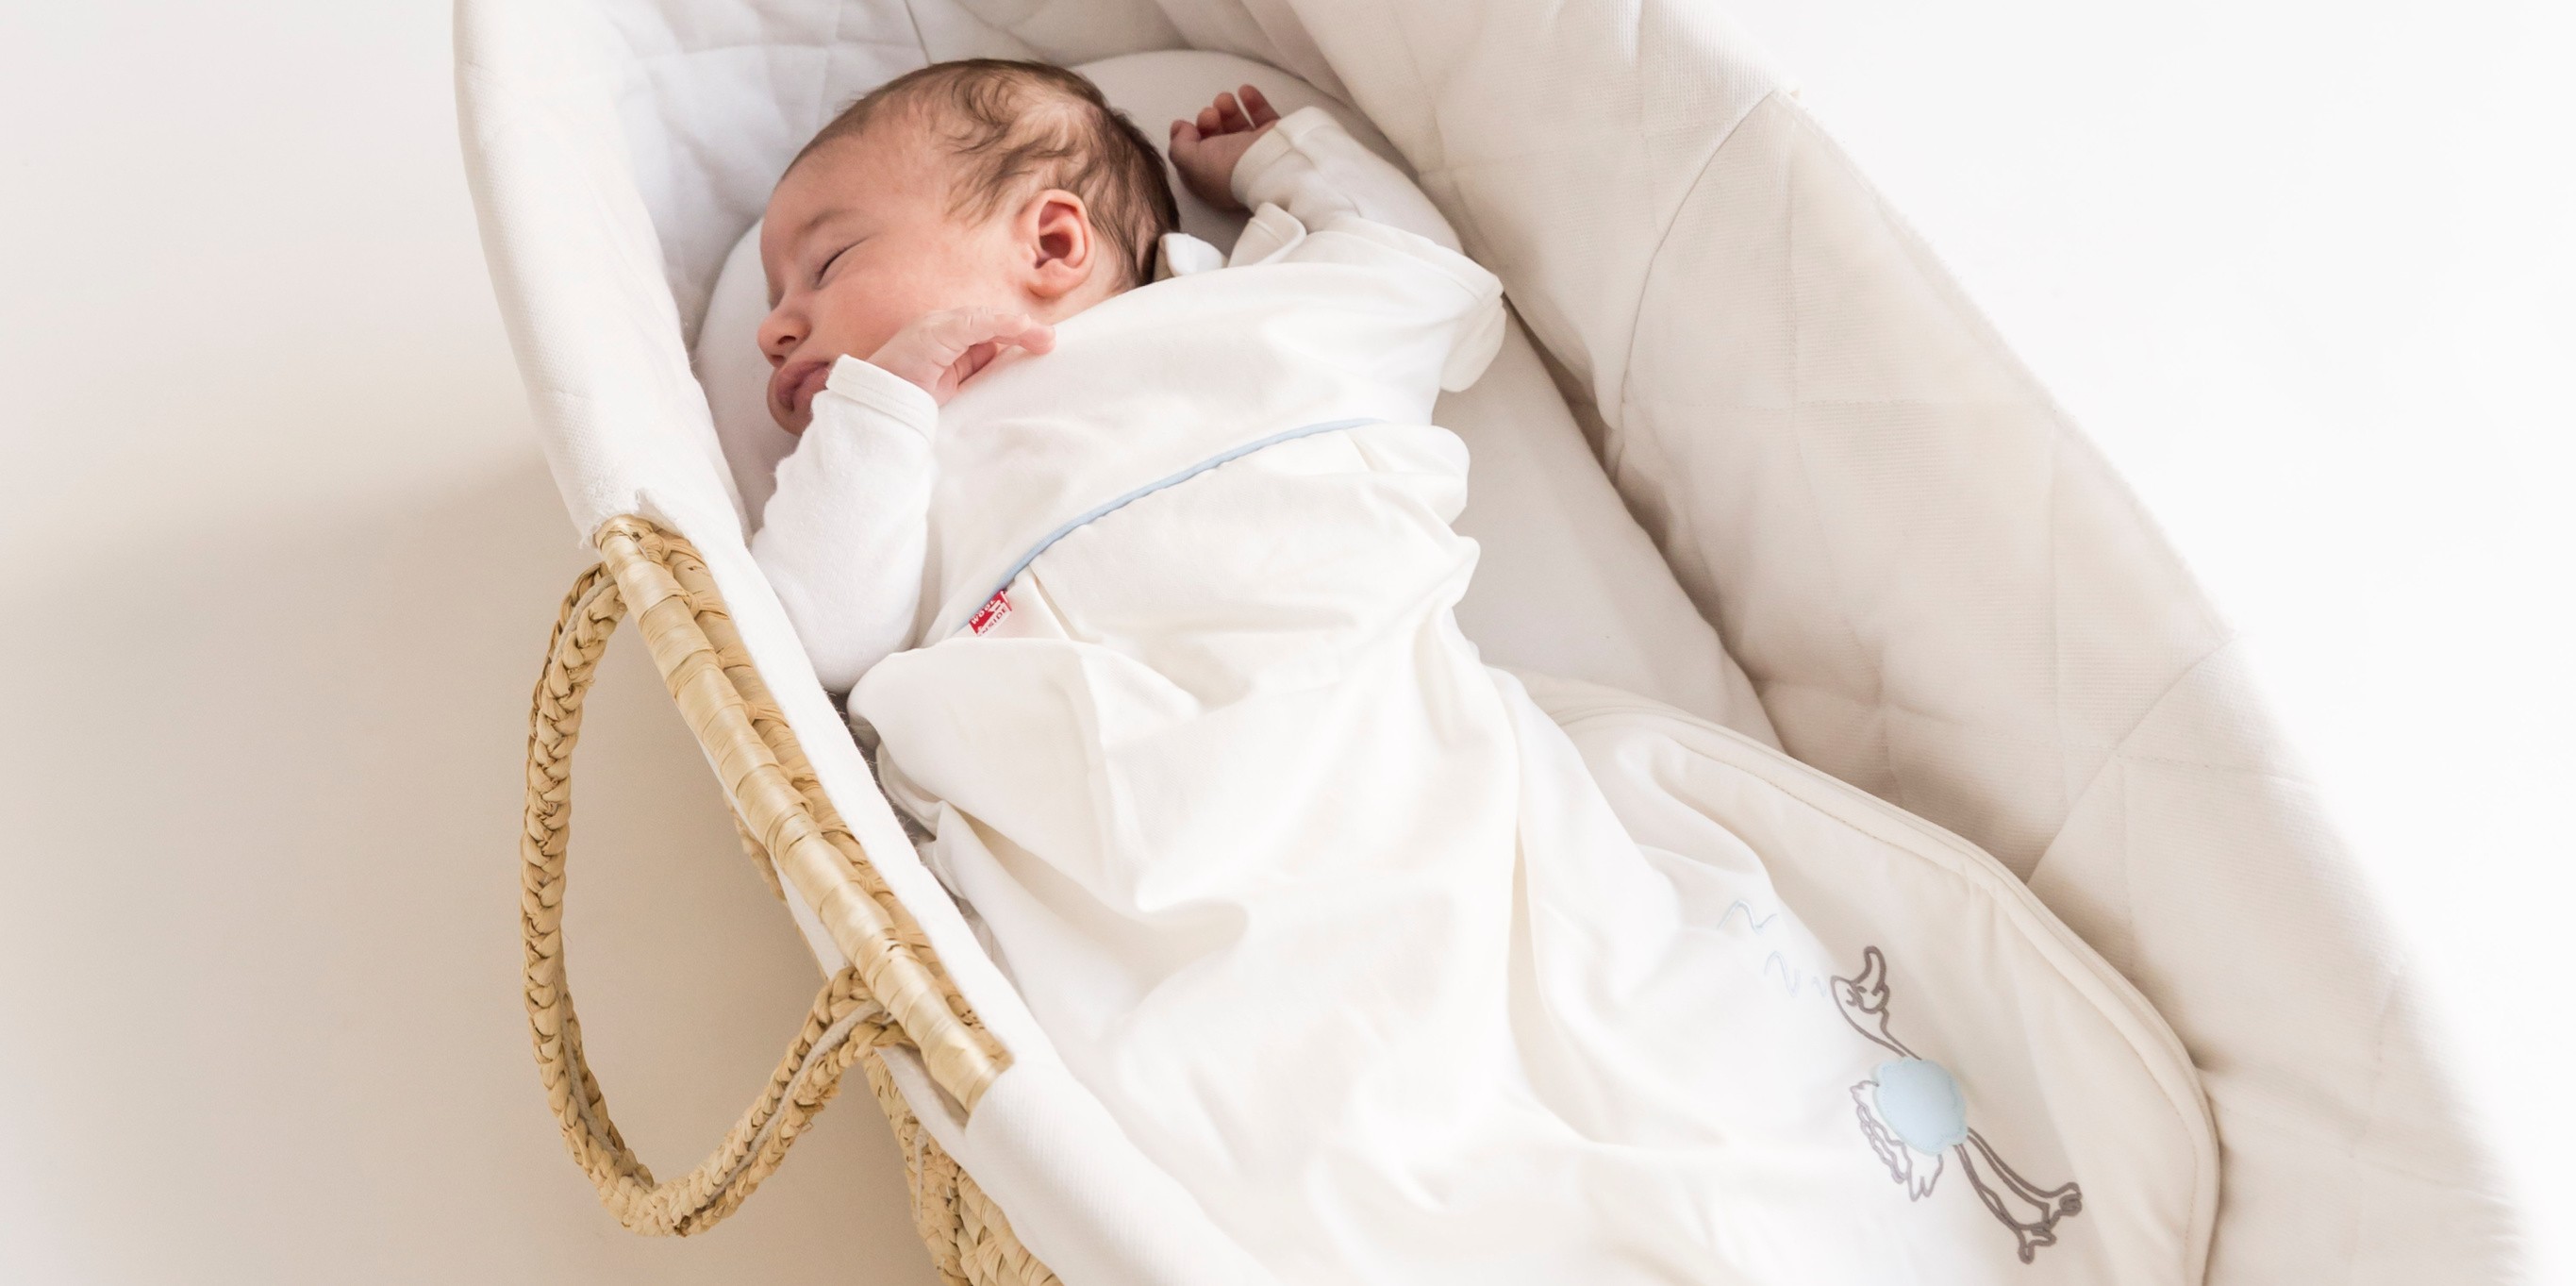 Sleep regression in babies: What causes it and when does it happen?